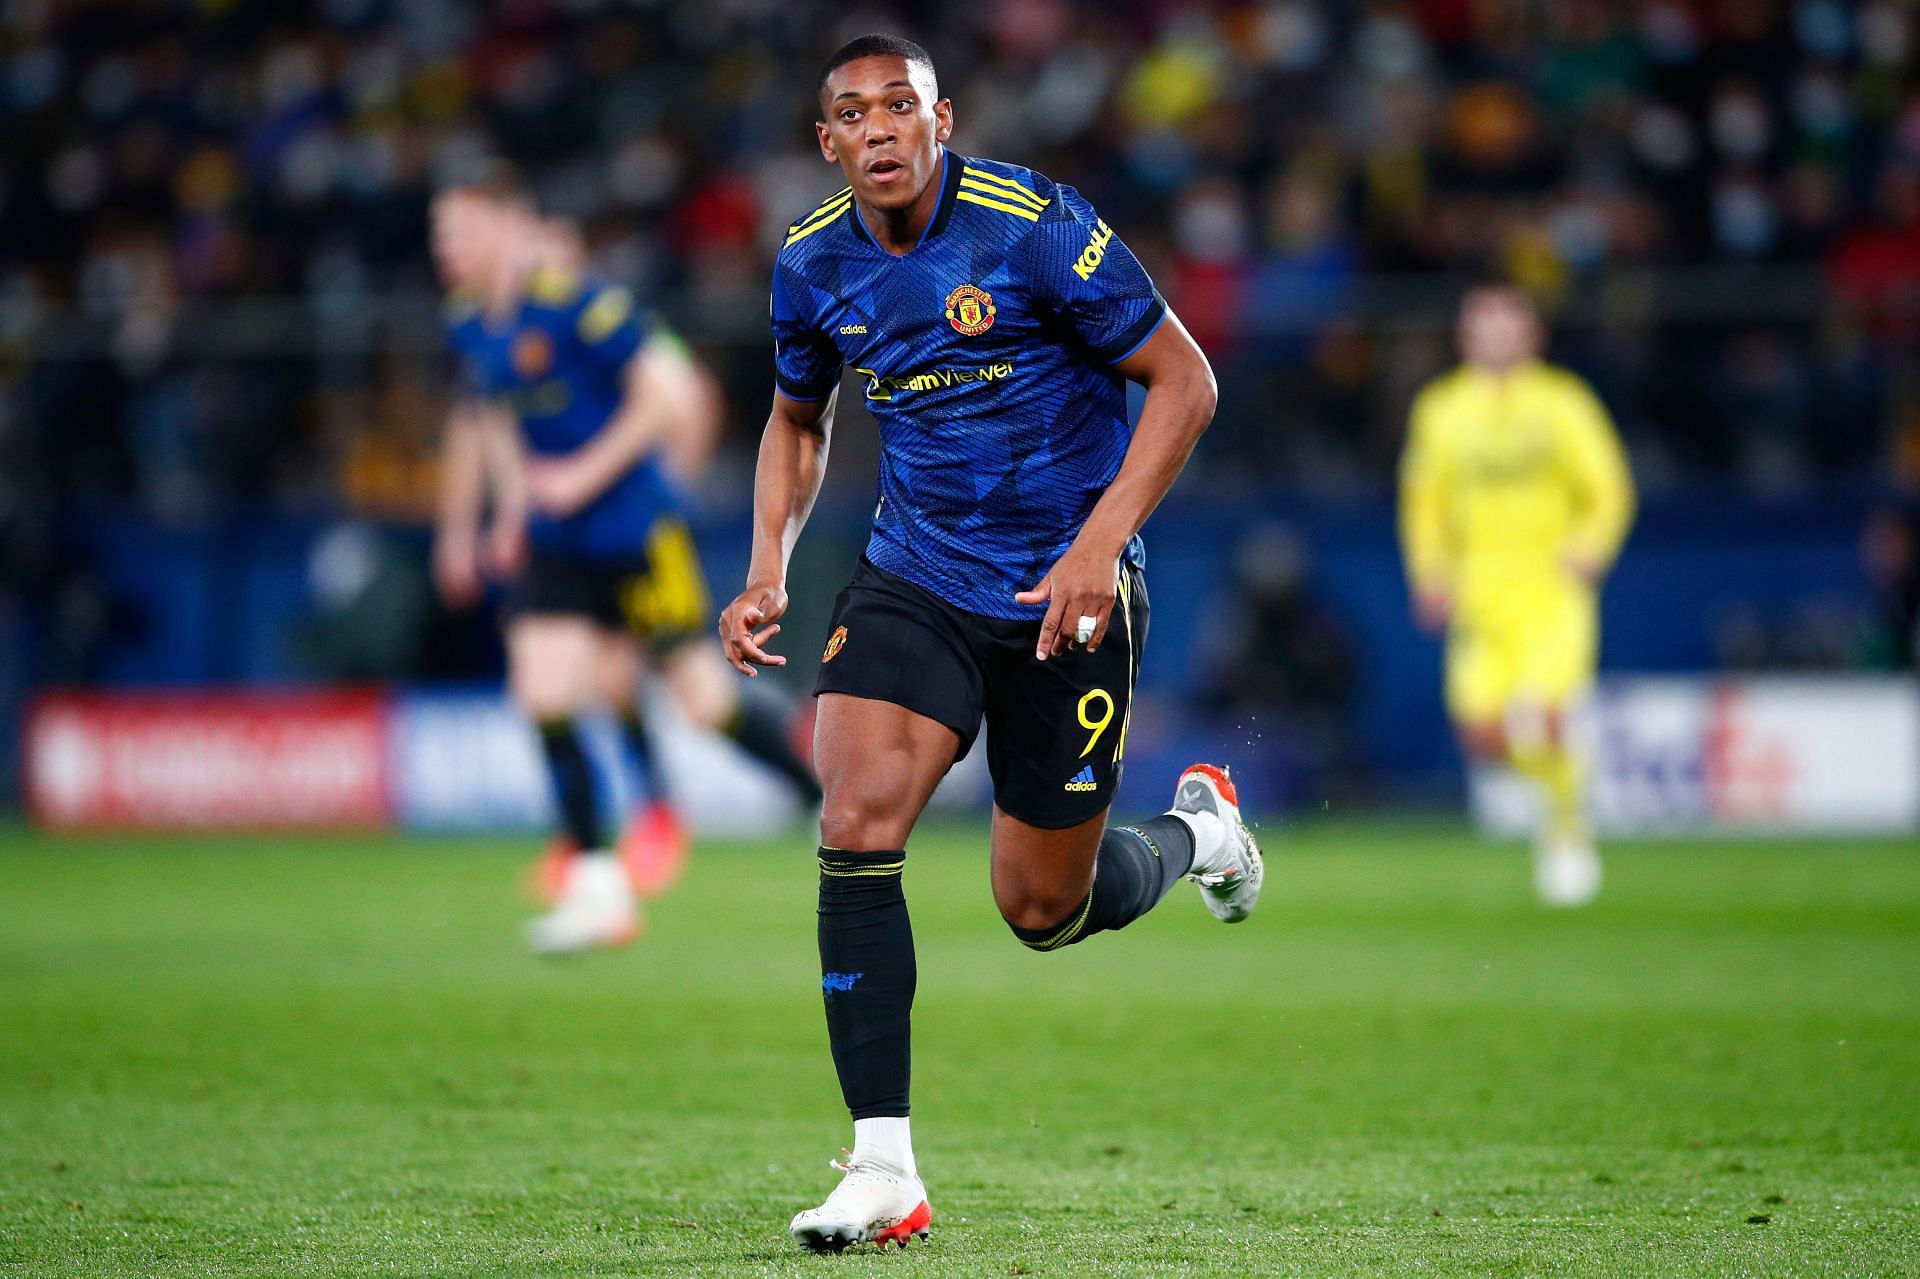 Simon Jordan has slammed Anthony Martial (in pic) for failing to develop his game like Cristiano Ronaldo.